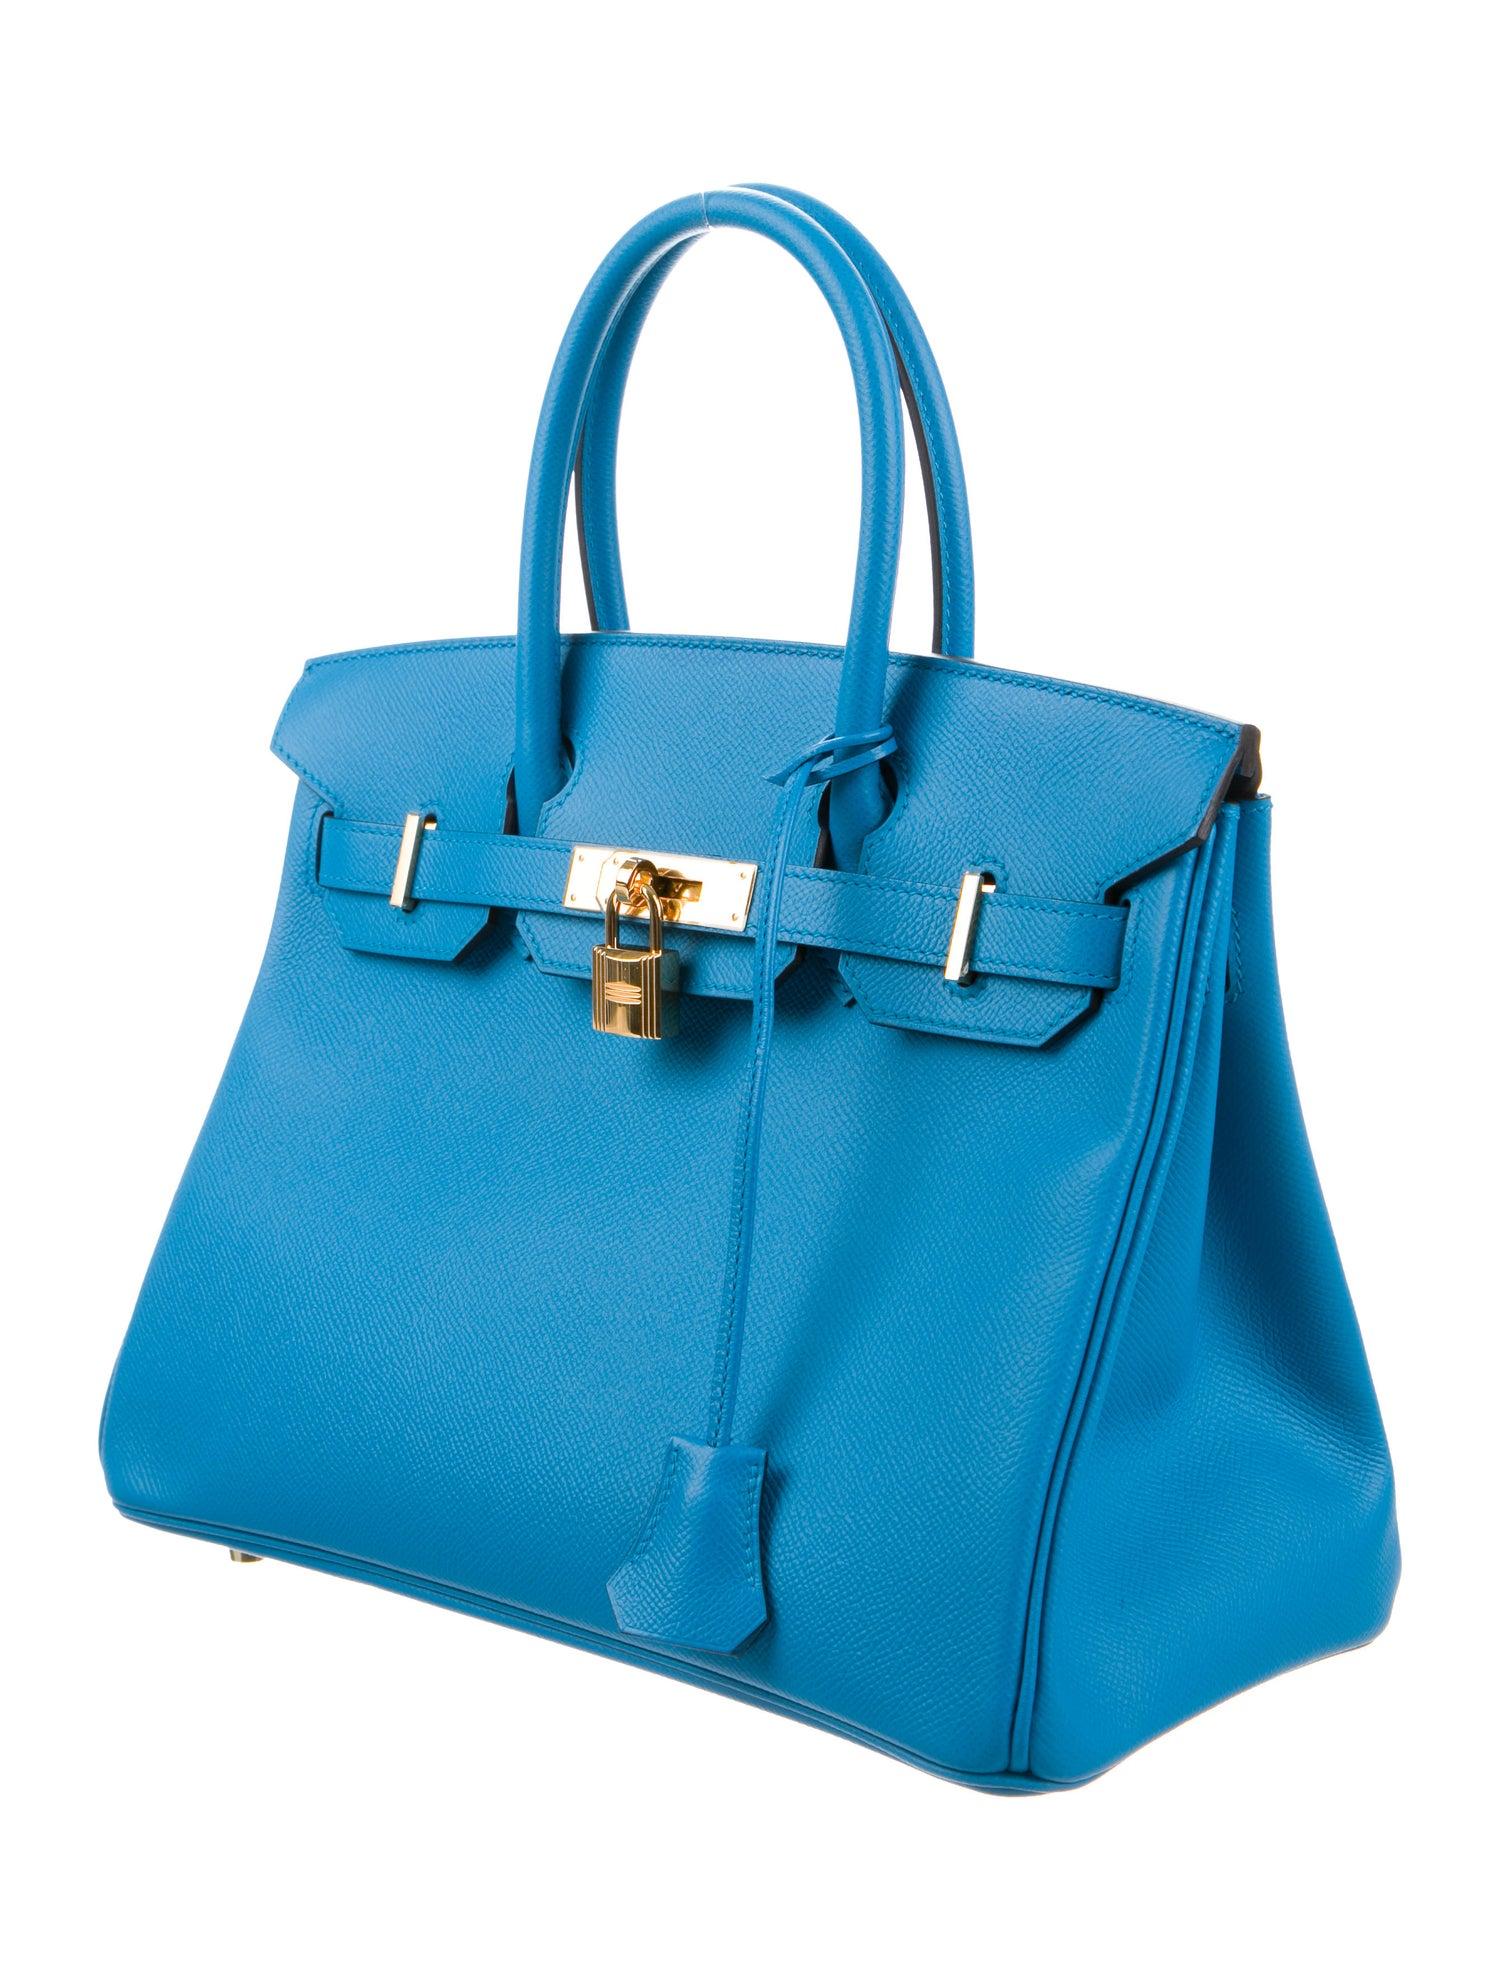 Hermes NEW Birkin 30 Aqua Blue Leather Gold Top Handle Satchel Tote Bag

Leather
Gold tone hardware
Leather lining
Date code present
Made in France
Handle drop 3.5